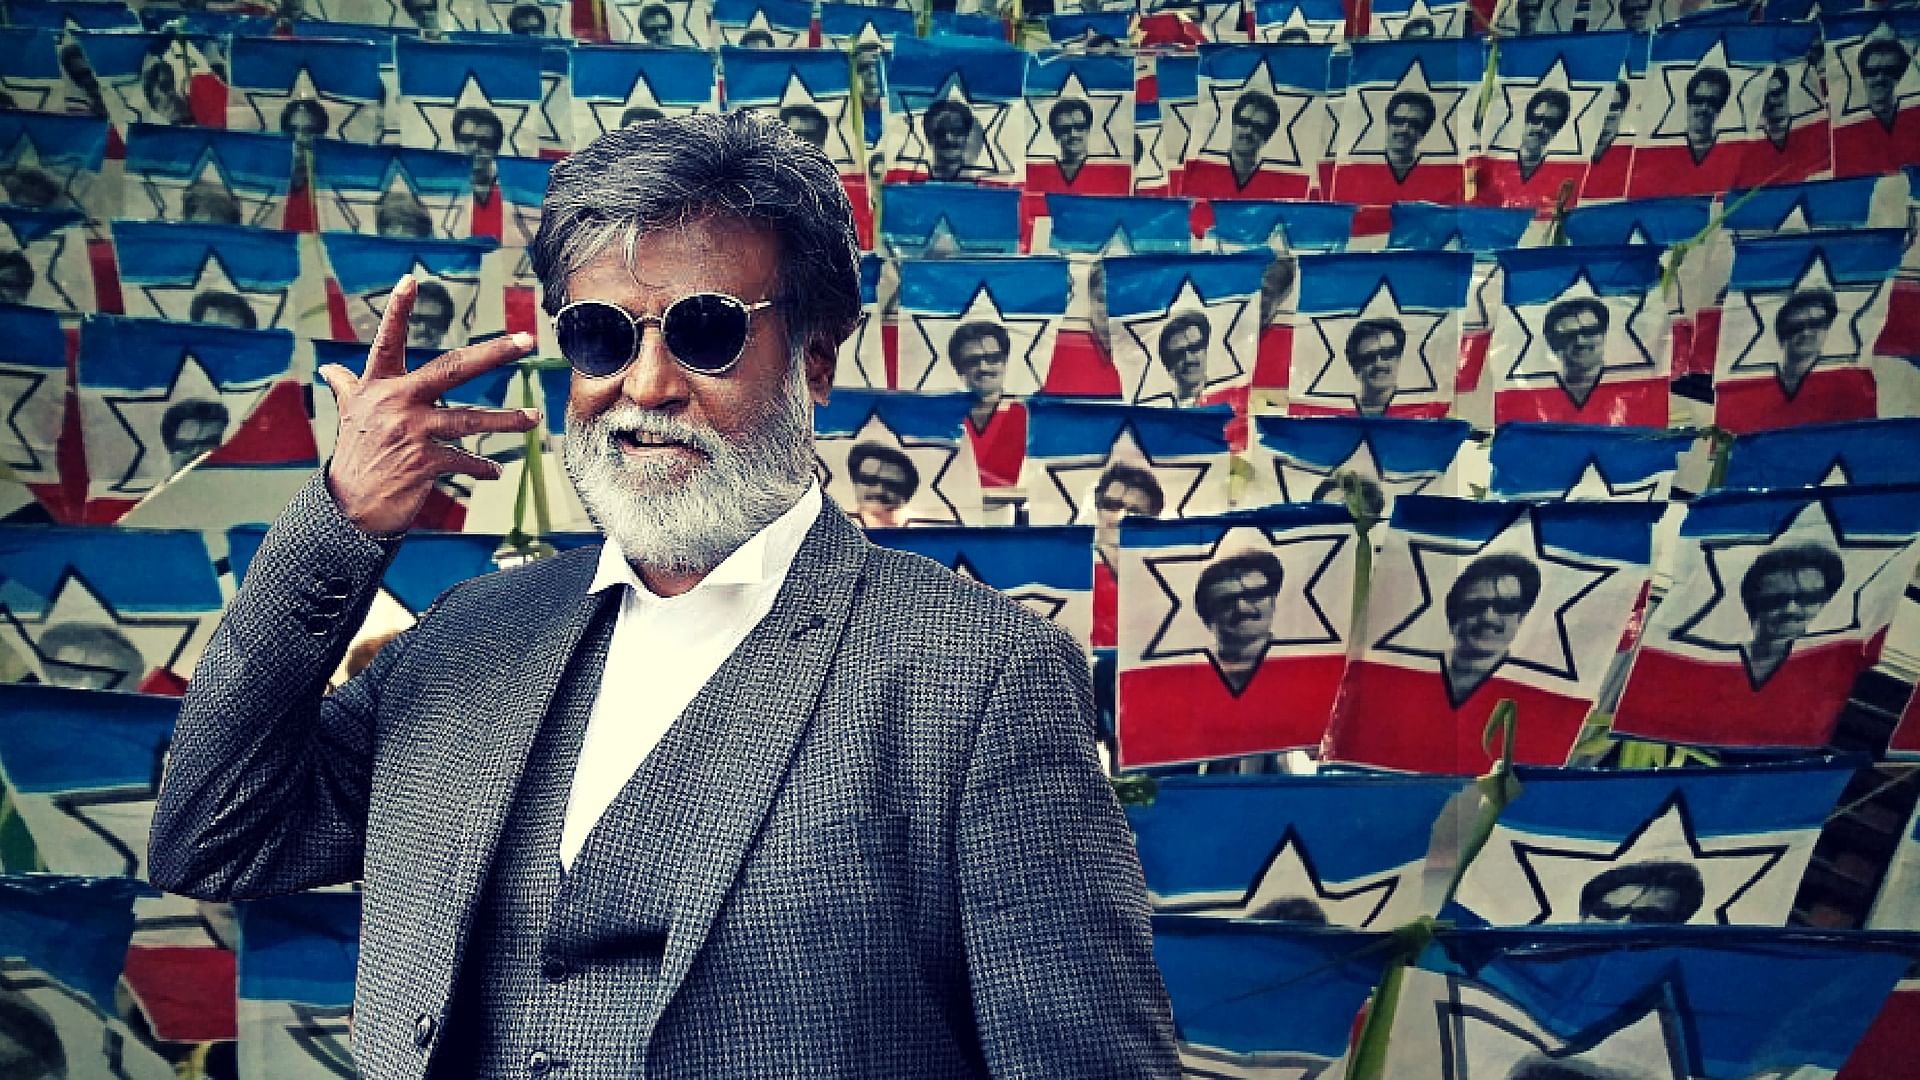 Rajinikanth takes India by storm on Kabali first day first show. (Photo courtesy: Twitter/@suresh_Mathew_; altered by The Quint)